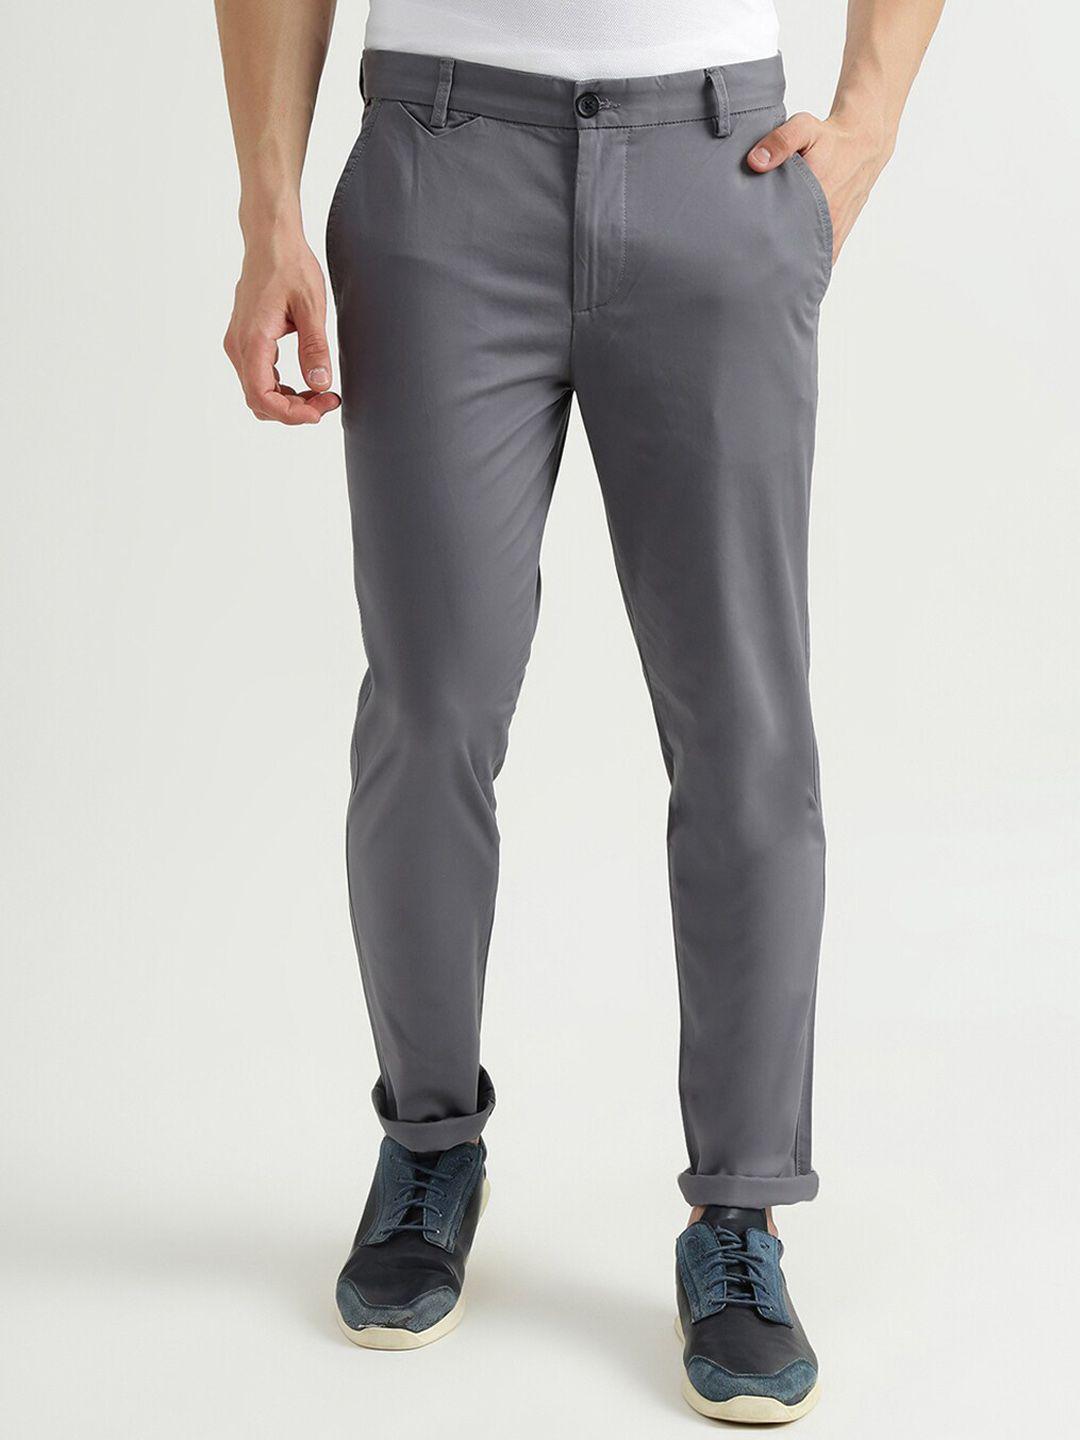 United Colors of Benetton Men Grey Cotton Solid Slim Fit Trousers